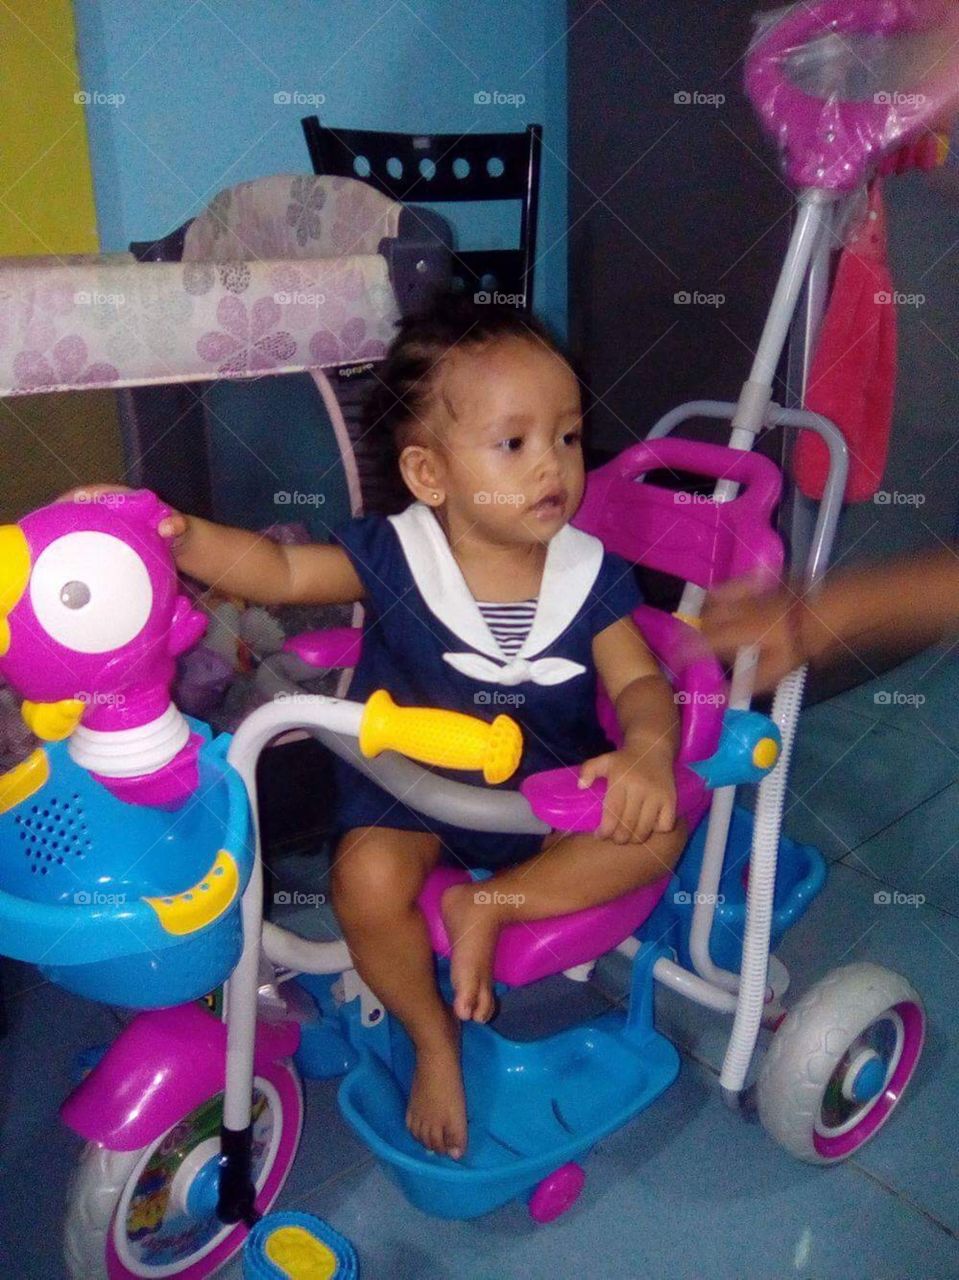 Our gorgeous little one year old, enjoying her birthday, with her highlight her very own bike.